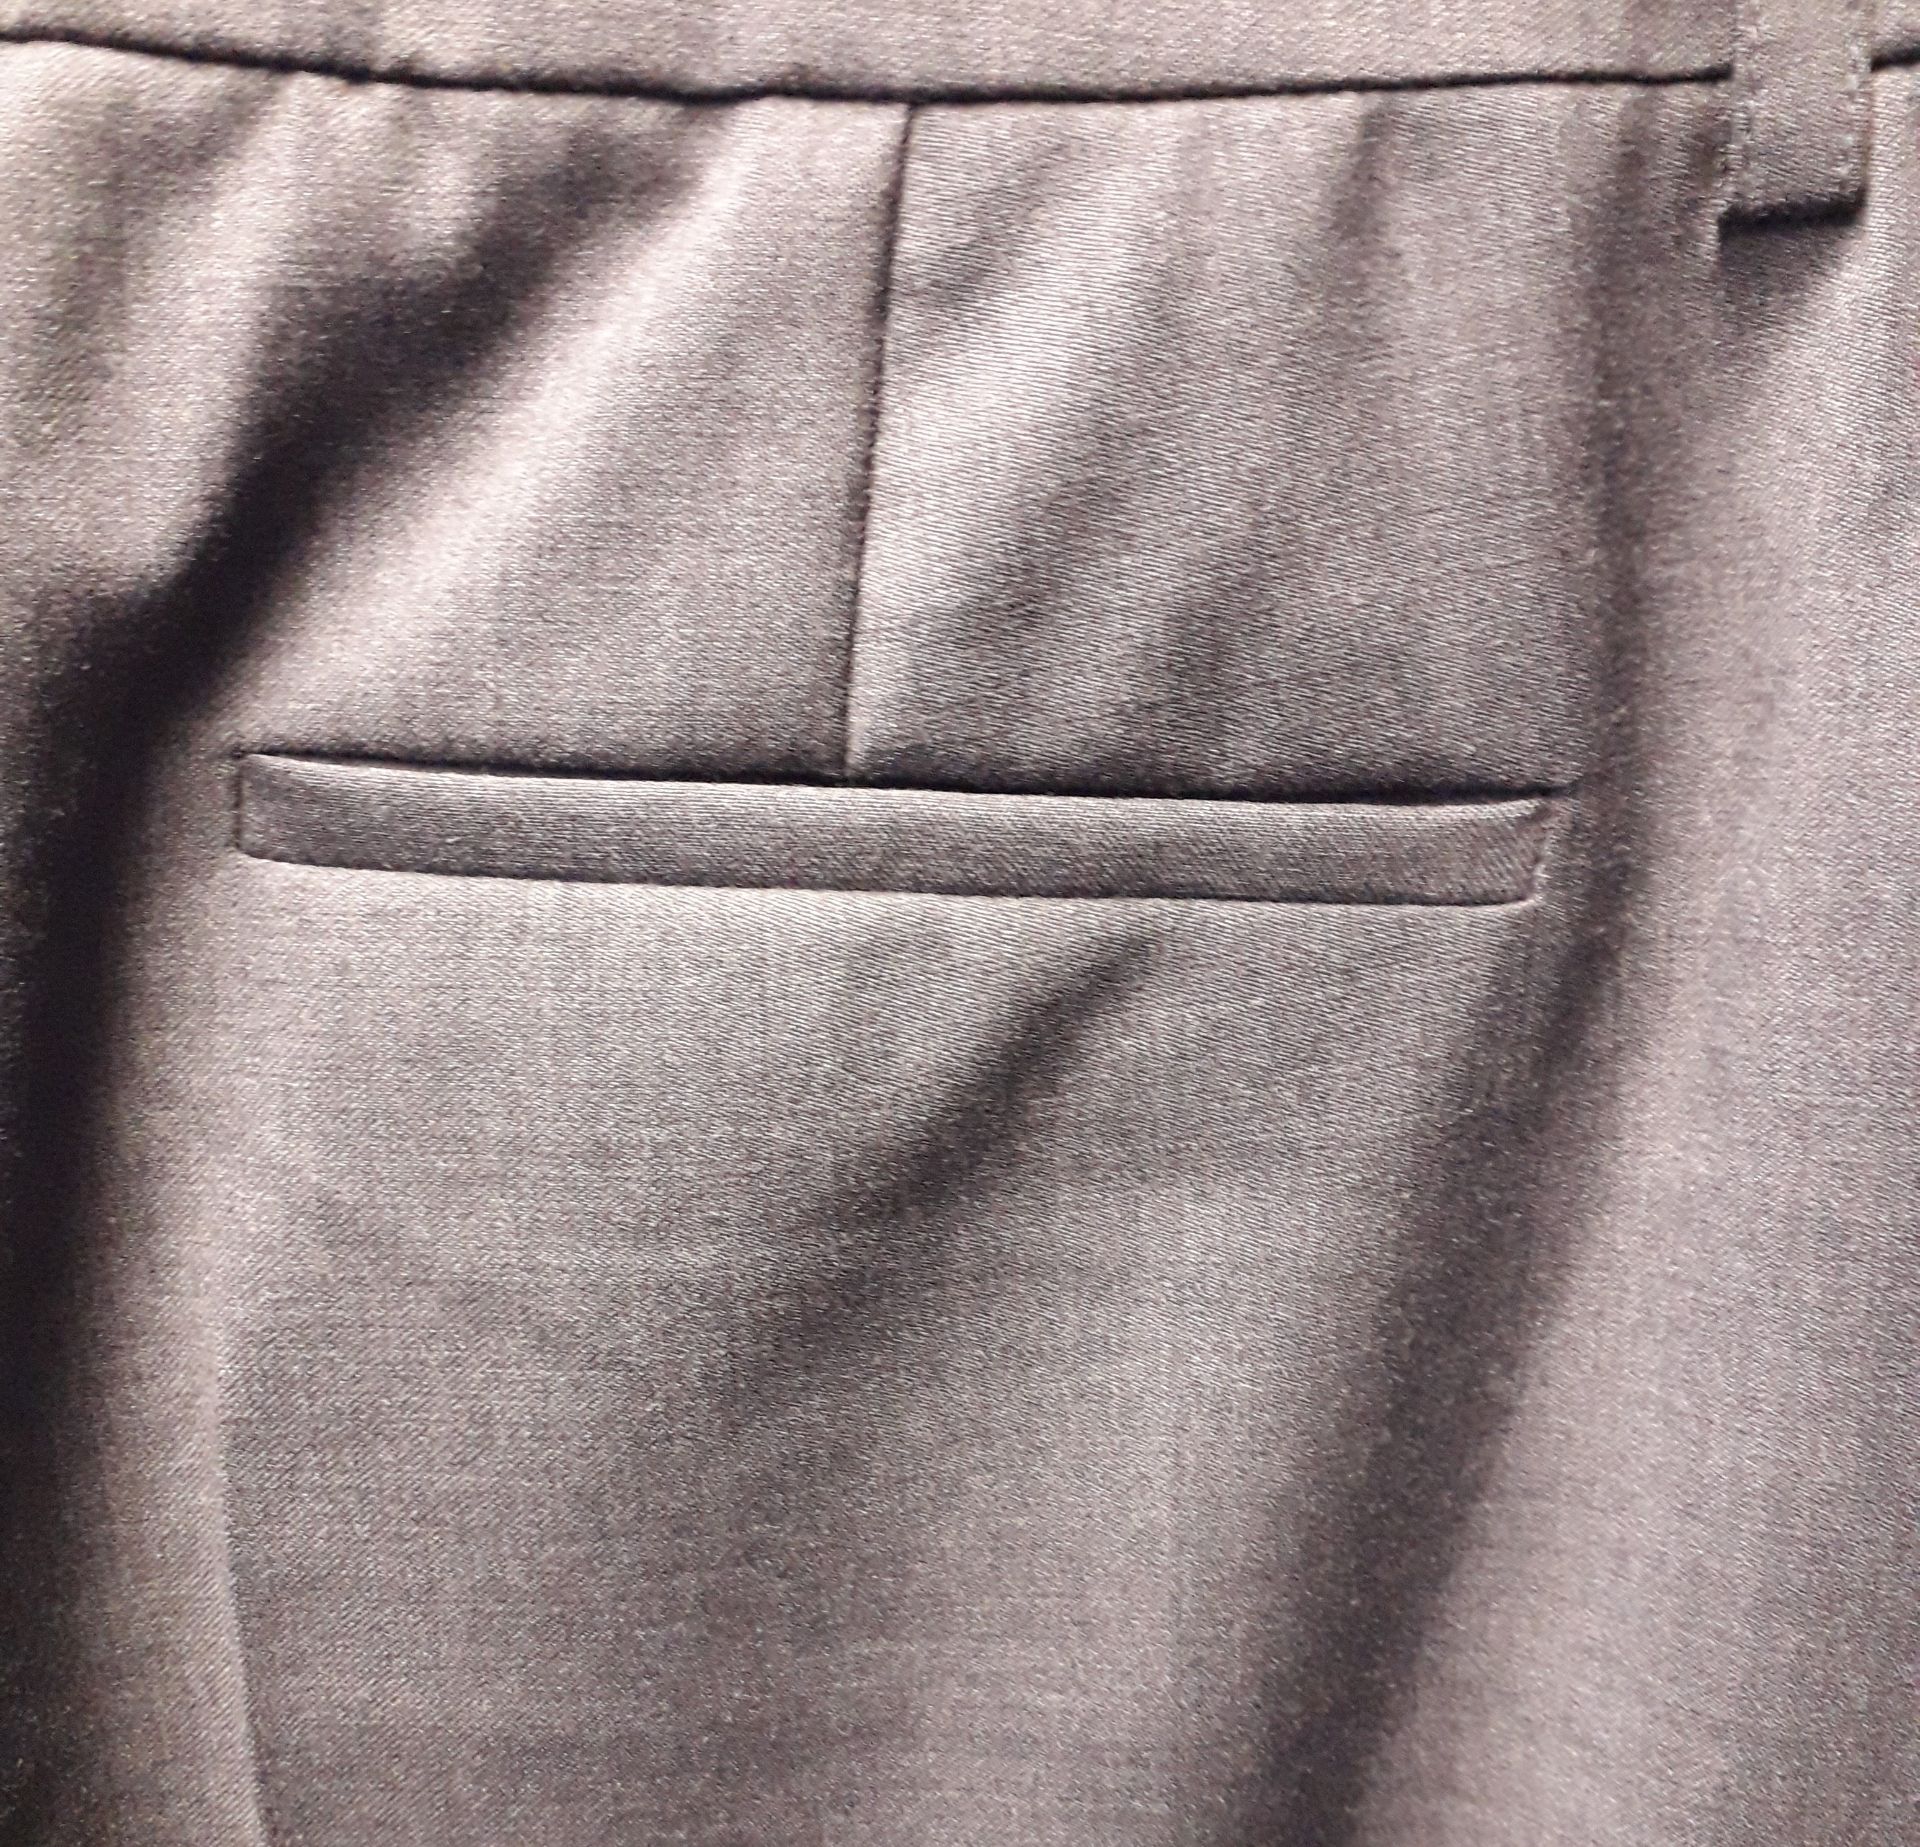 1 x Natan Collection Mid-Grey Wide Leg Tailored Trousers - Size: 44 - Material: 100% Linen - From - Image 4 of 6